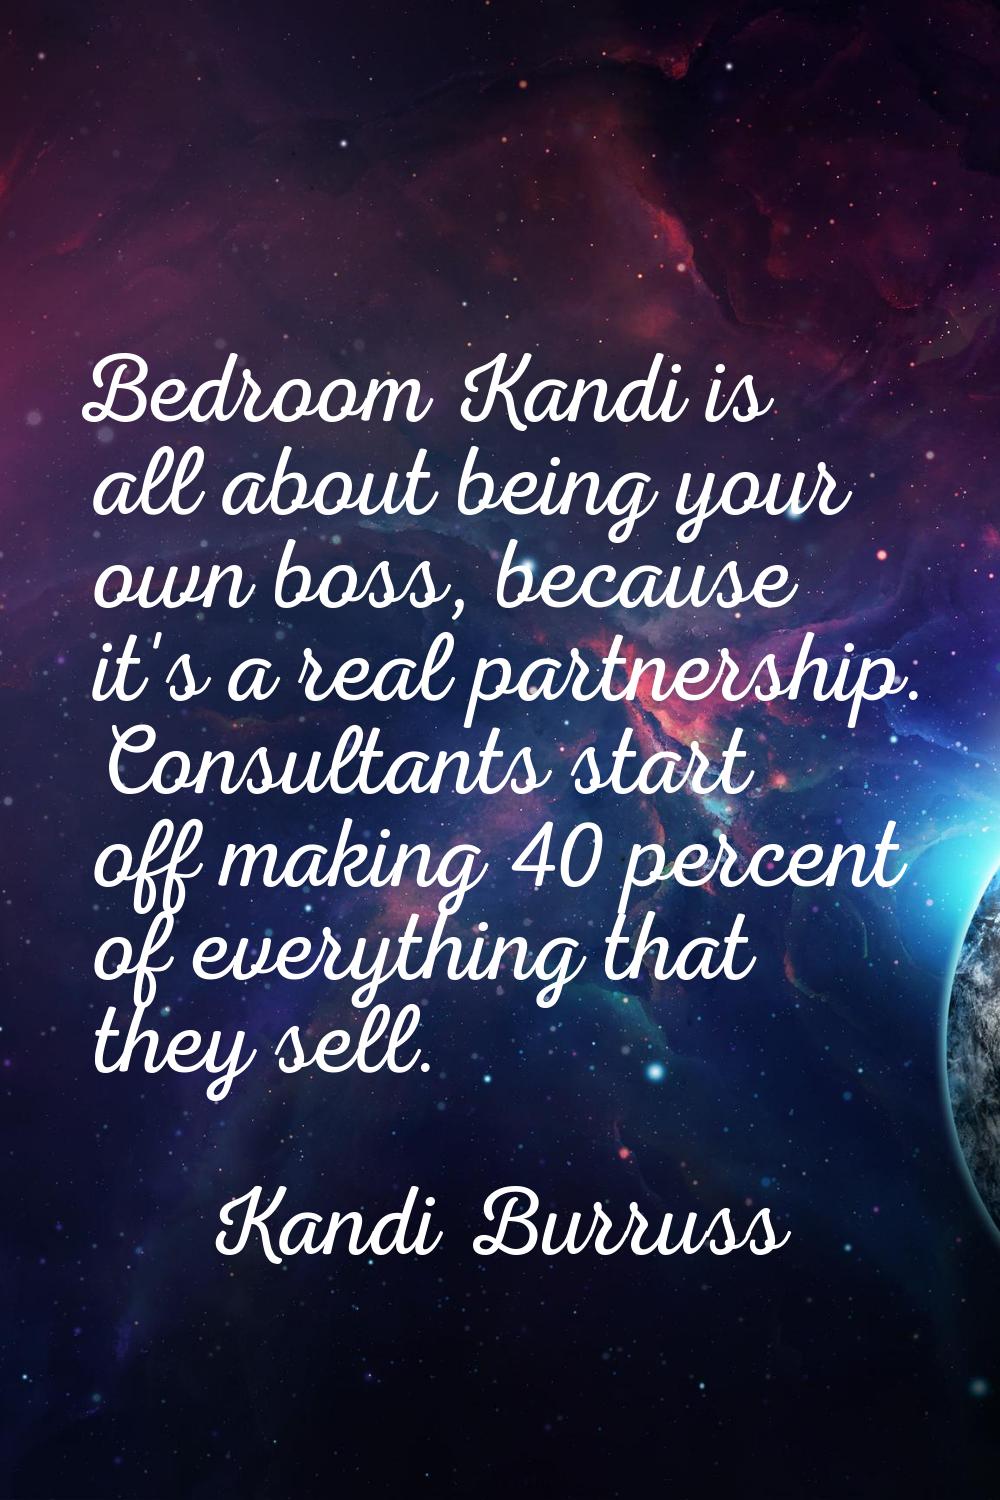 Bedroom Kandi is all about being your own boss, because it's a real partnership. Consultants start 